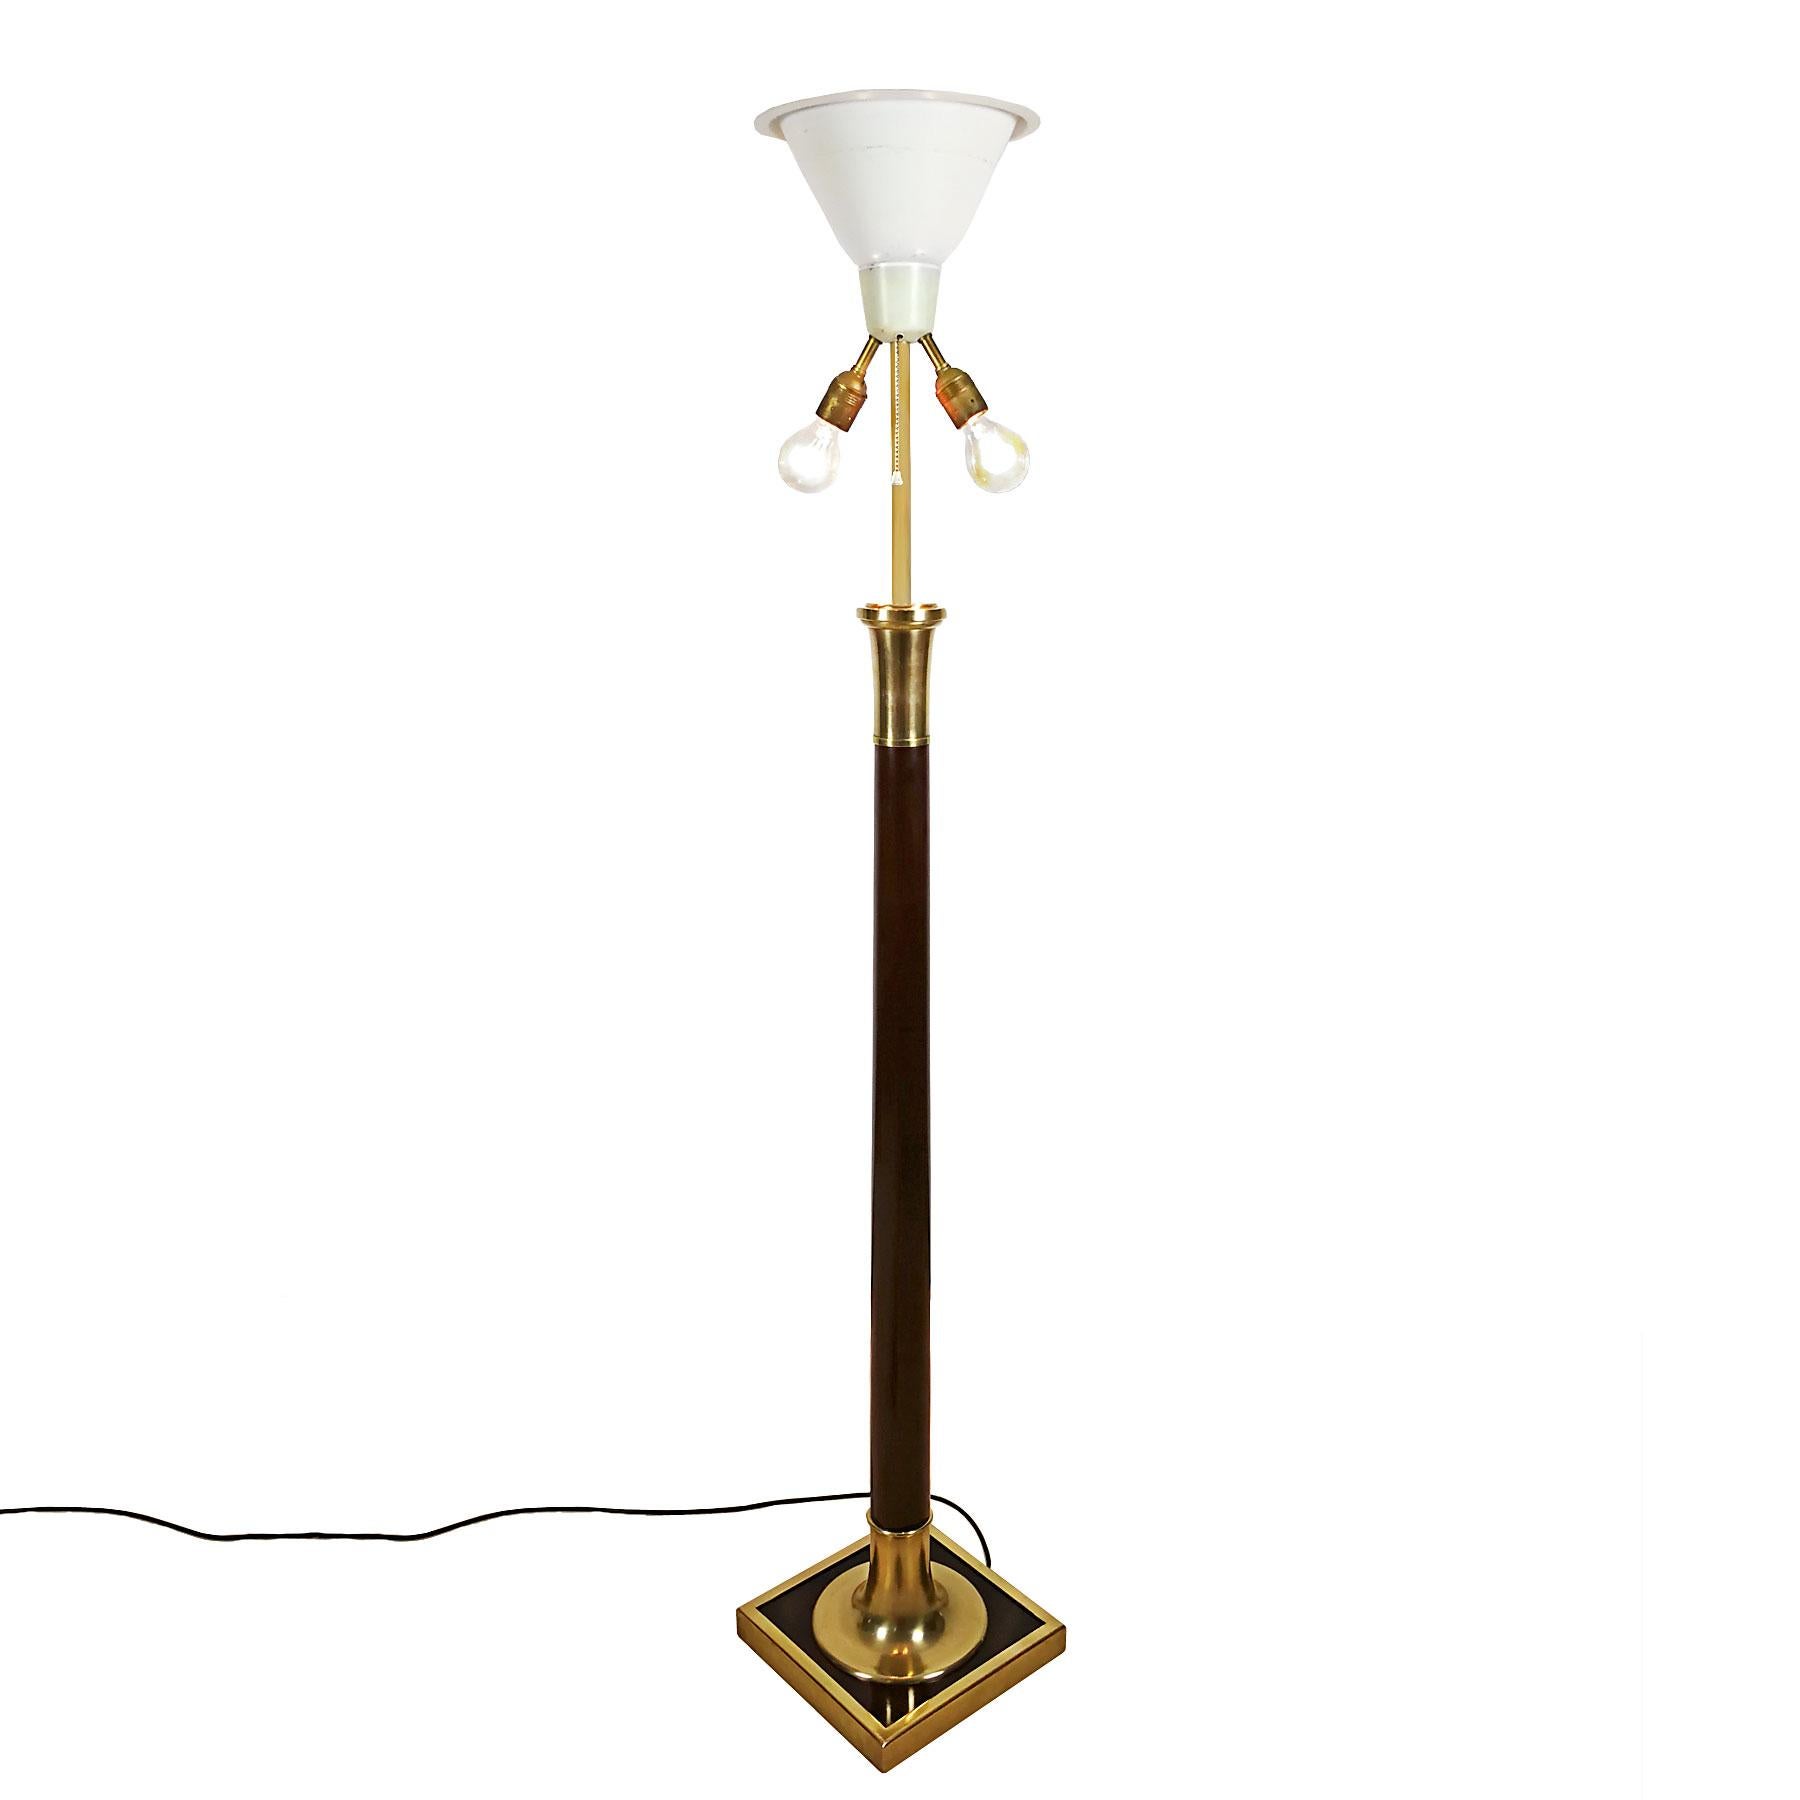 Mid-Century Modern Standing Lamp by Metalarte in Solid Mahogany, Brass - Spain For Sale 2